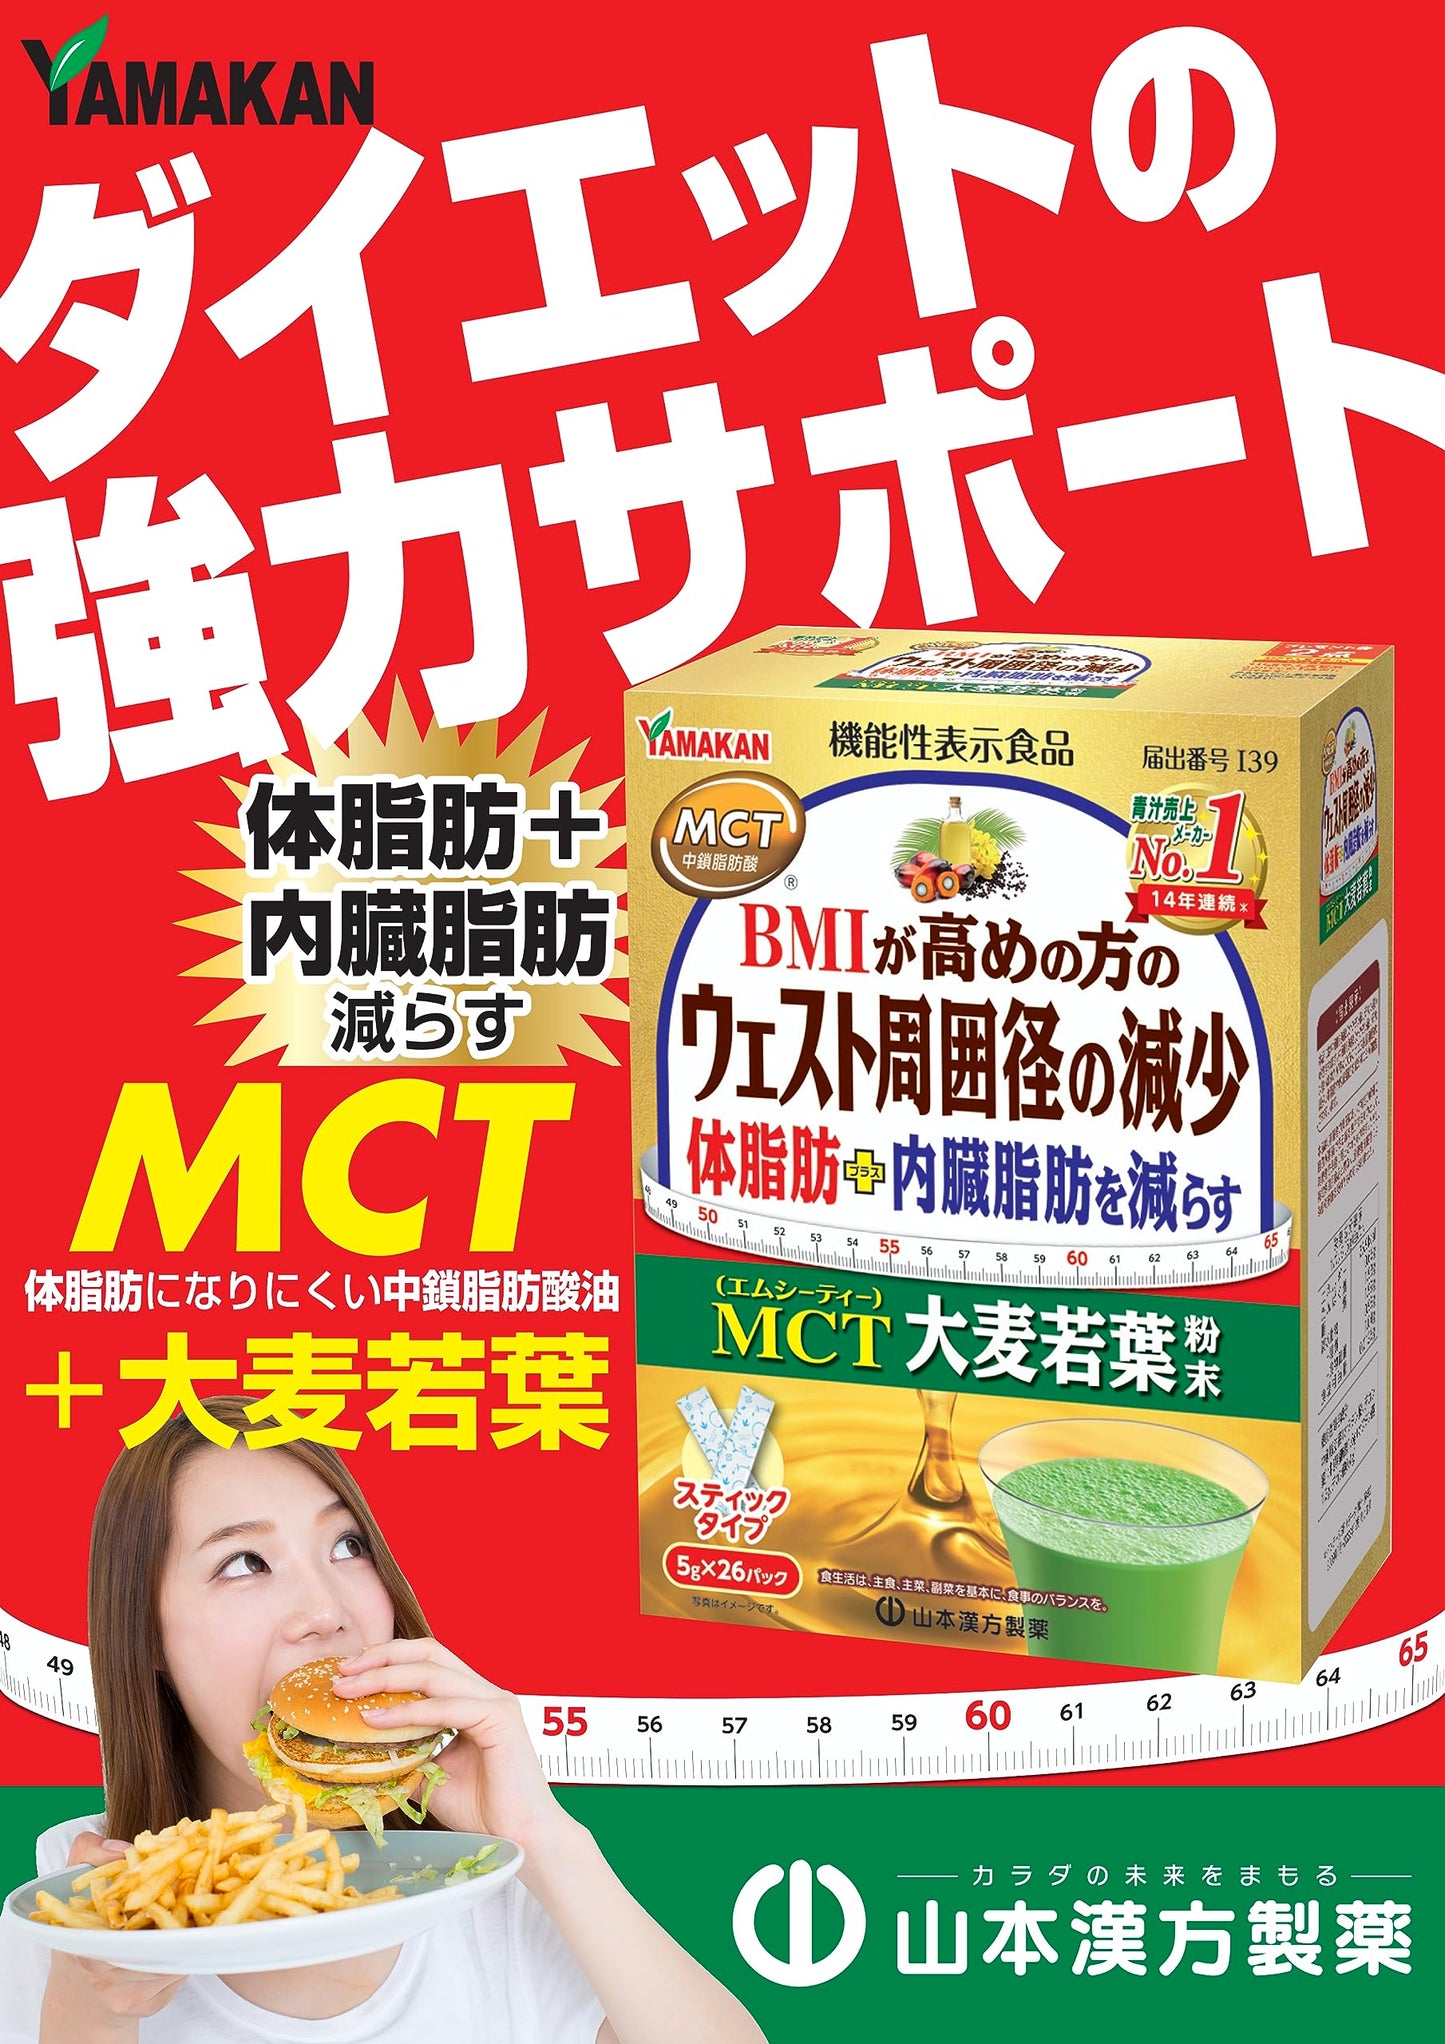 [Food with Functional Claims] Yamamoto Kampo Pharmaceutical MCT Barley Grass Powder 5g x 26 packets